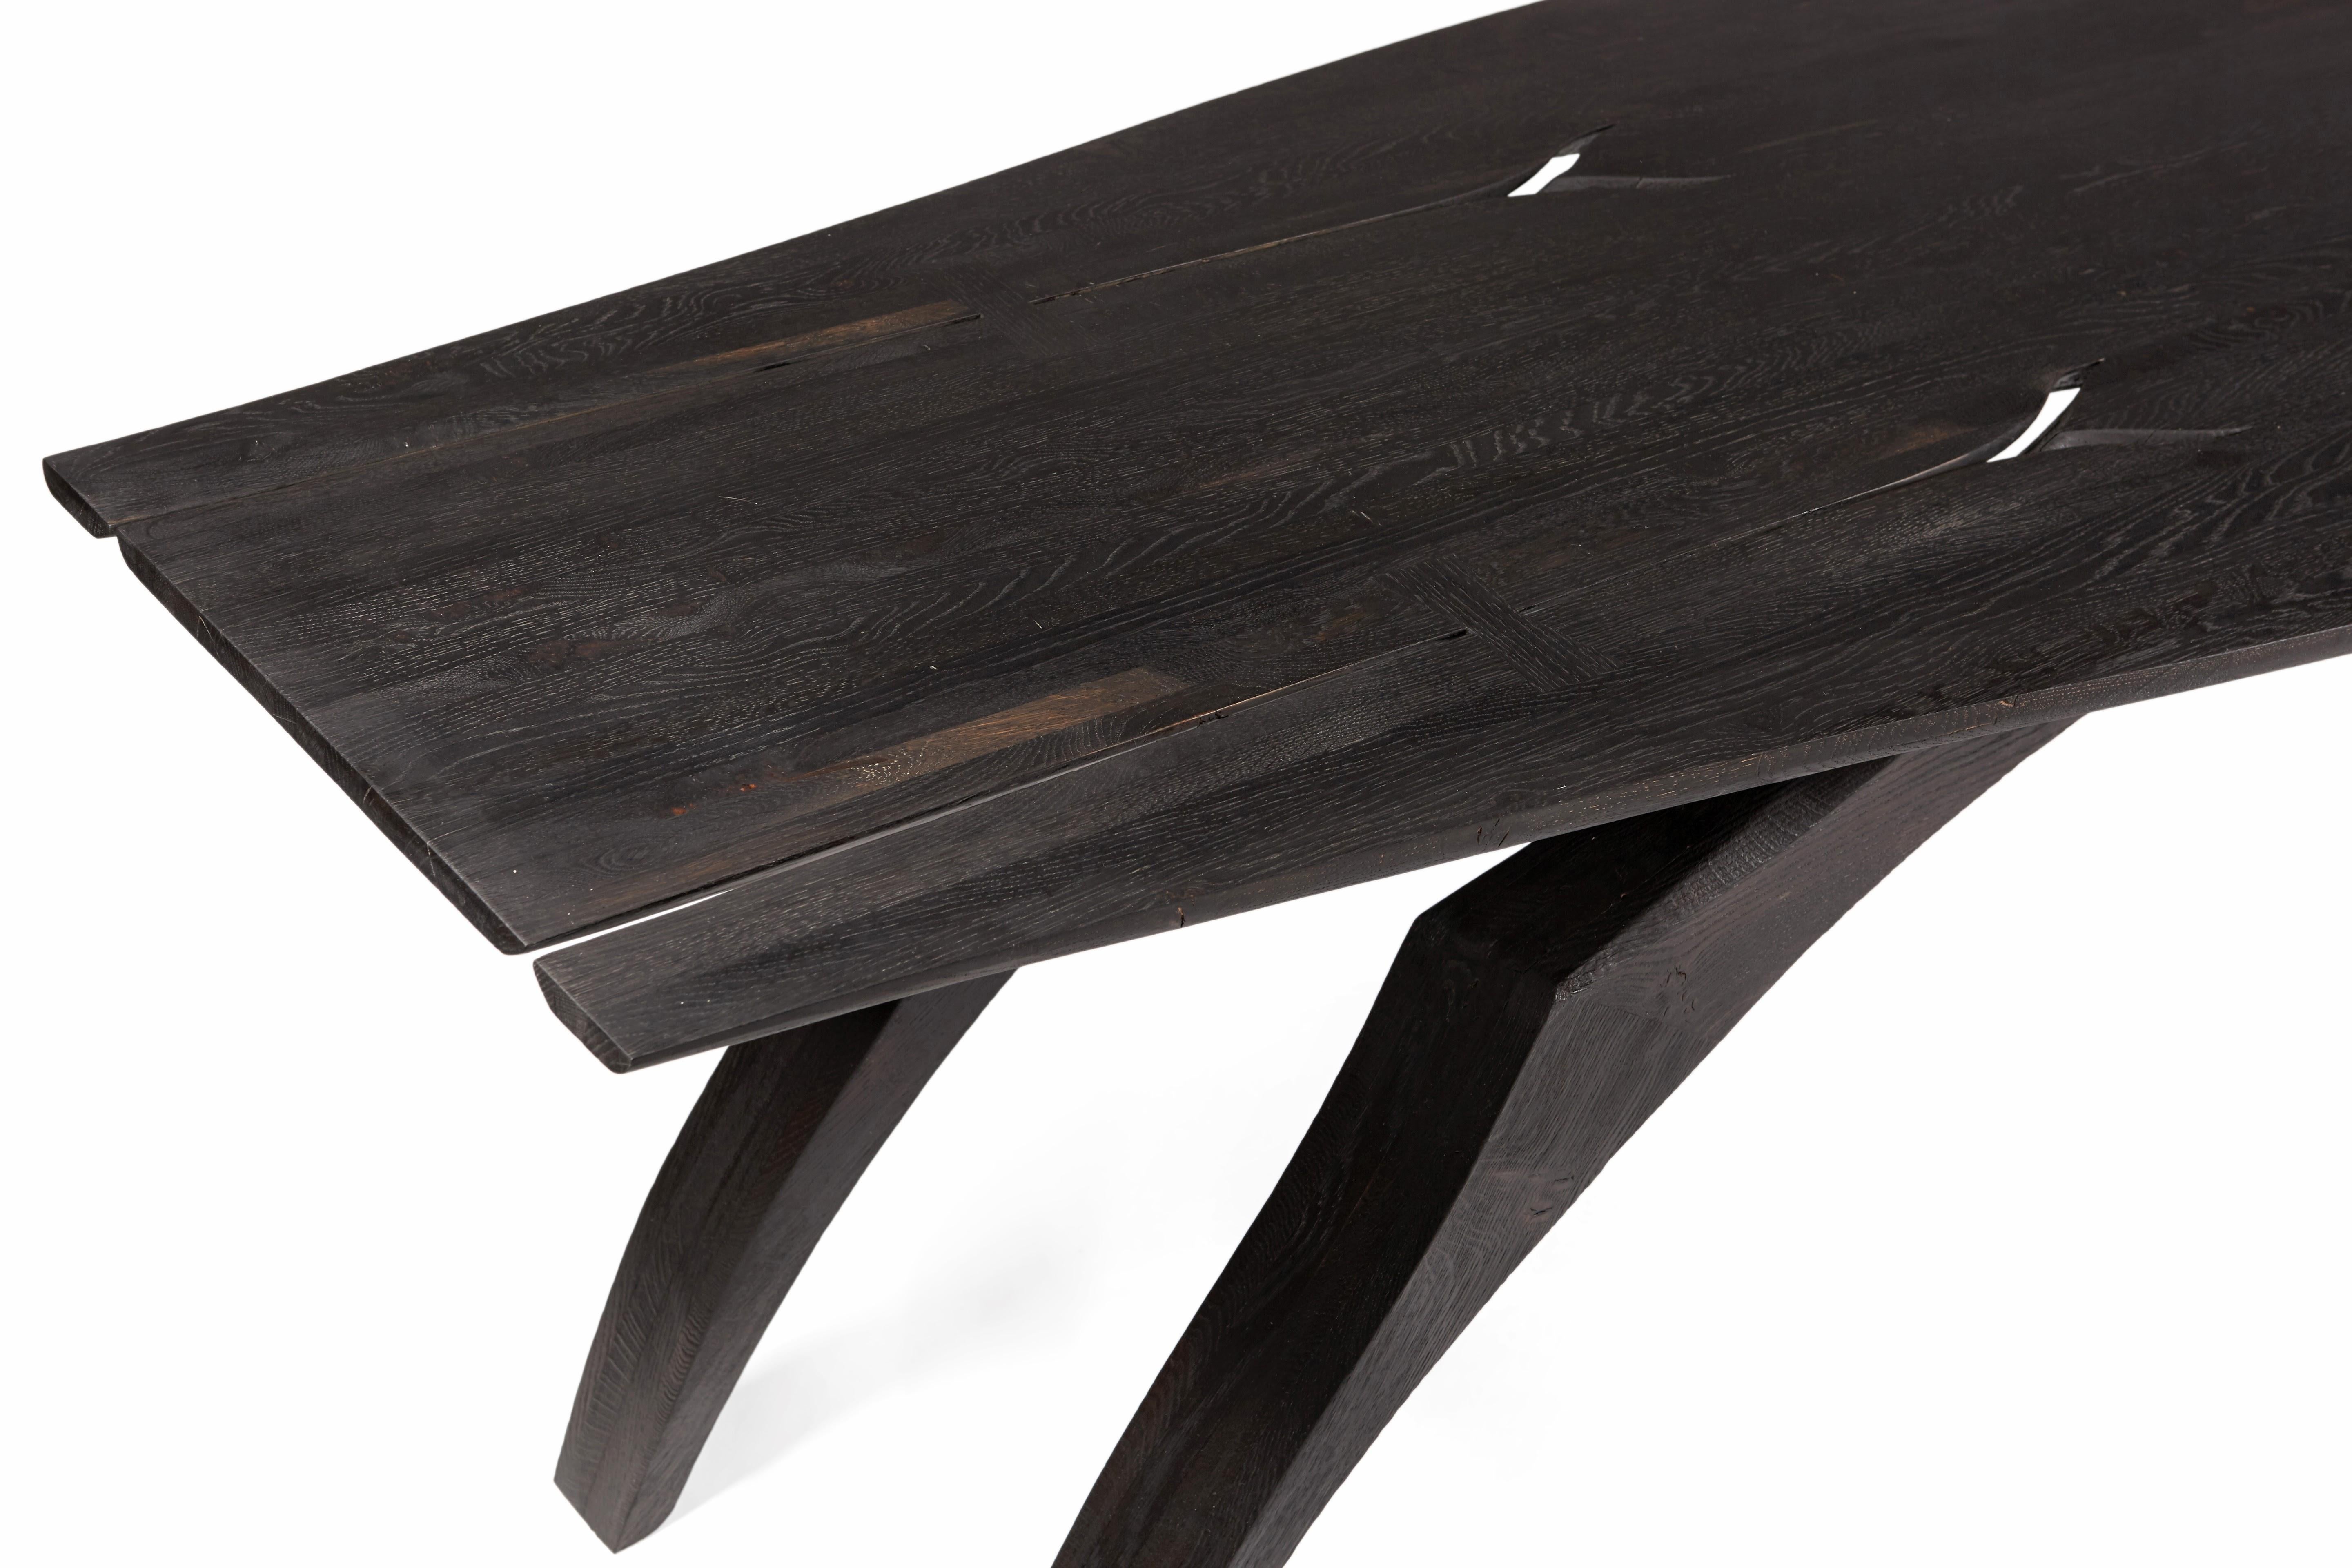 English 'Leap' table by Jonathan Field. Scorched legs & ebonized top. 